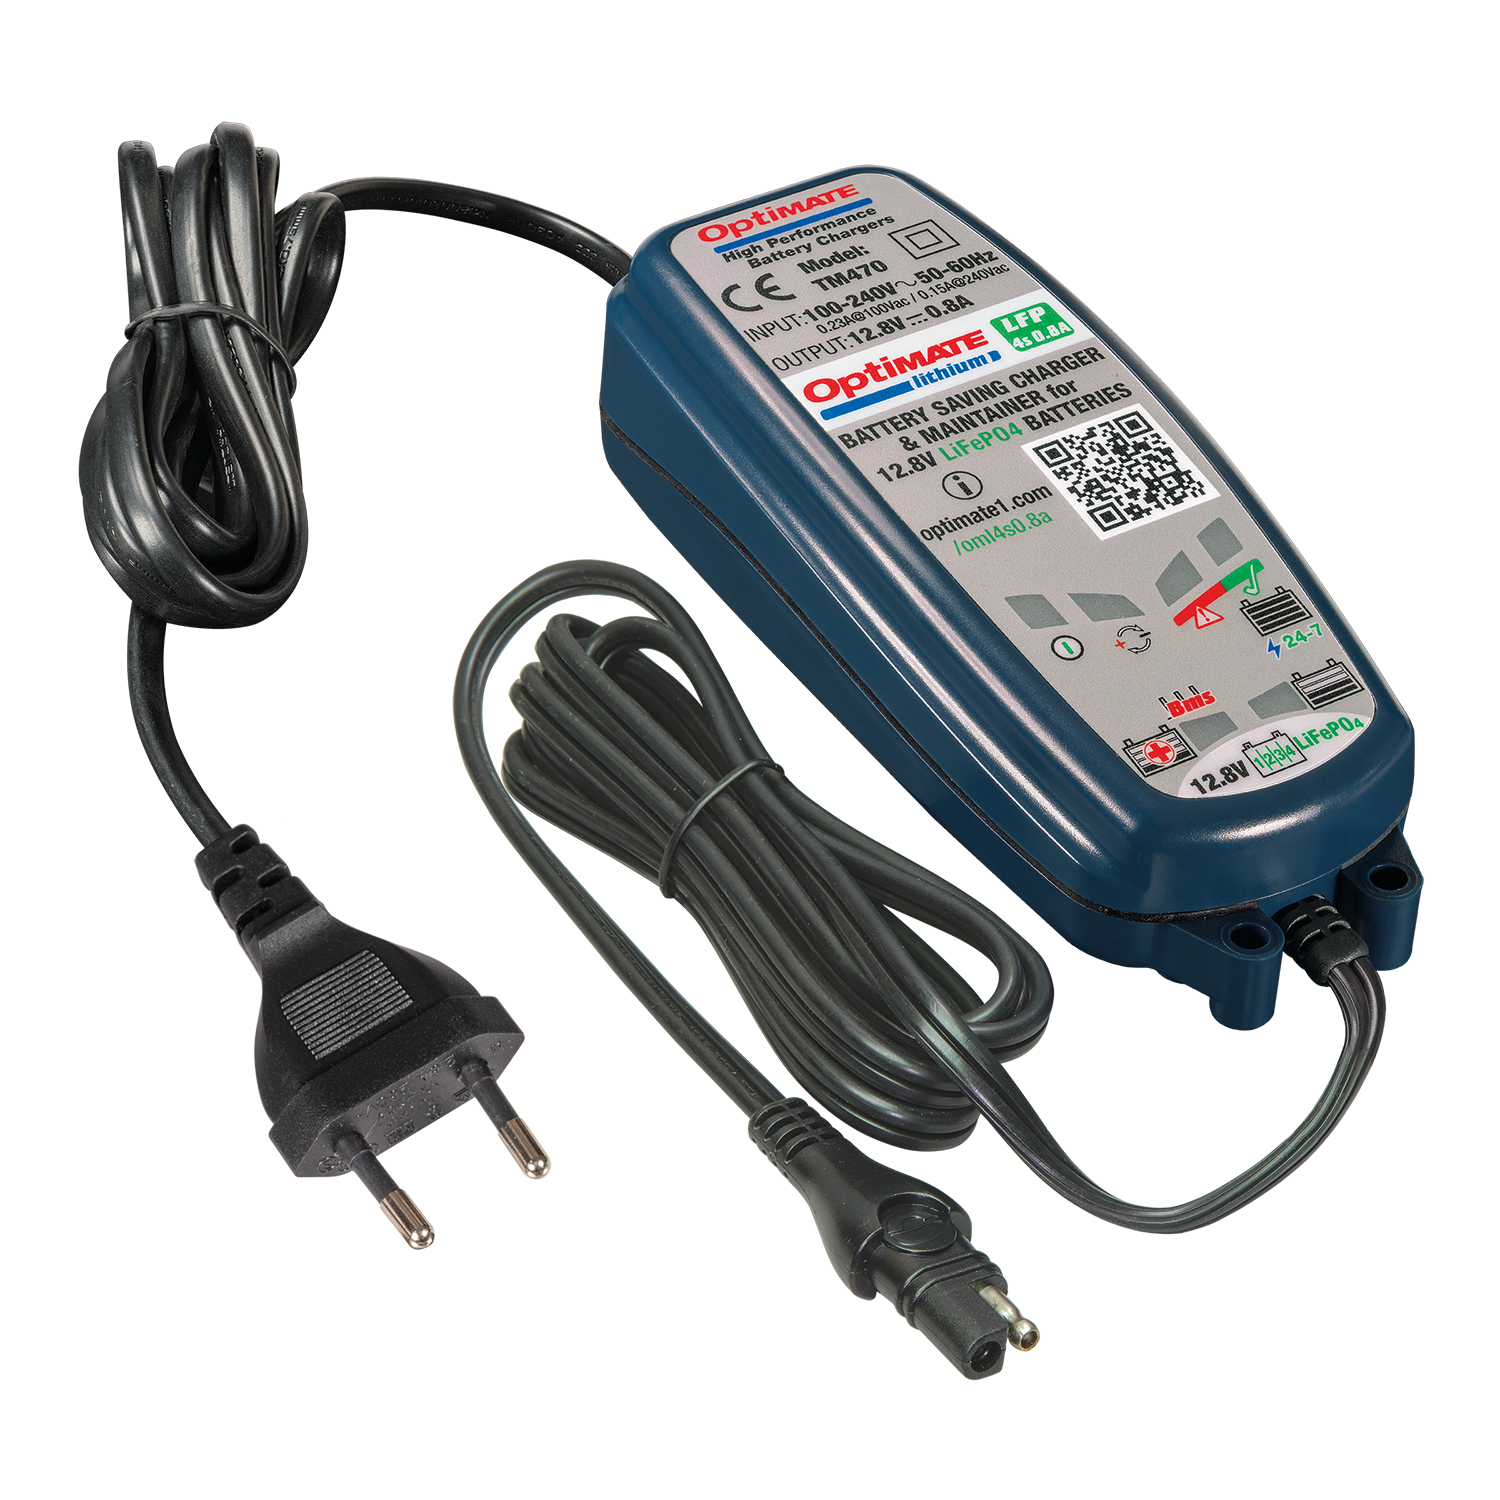 8-step 12.8/13.2V Battery Saving Charger TM471 TecMate OptiMate Lithium 4s 0.8A 